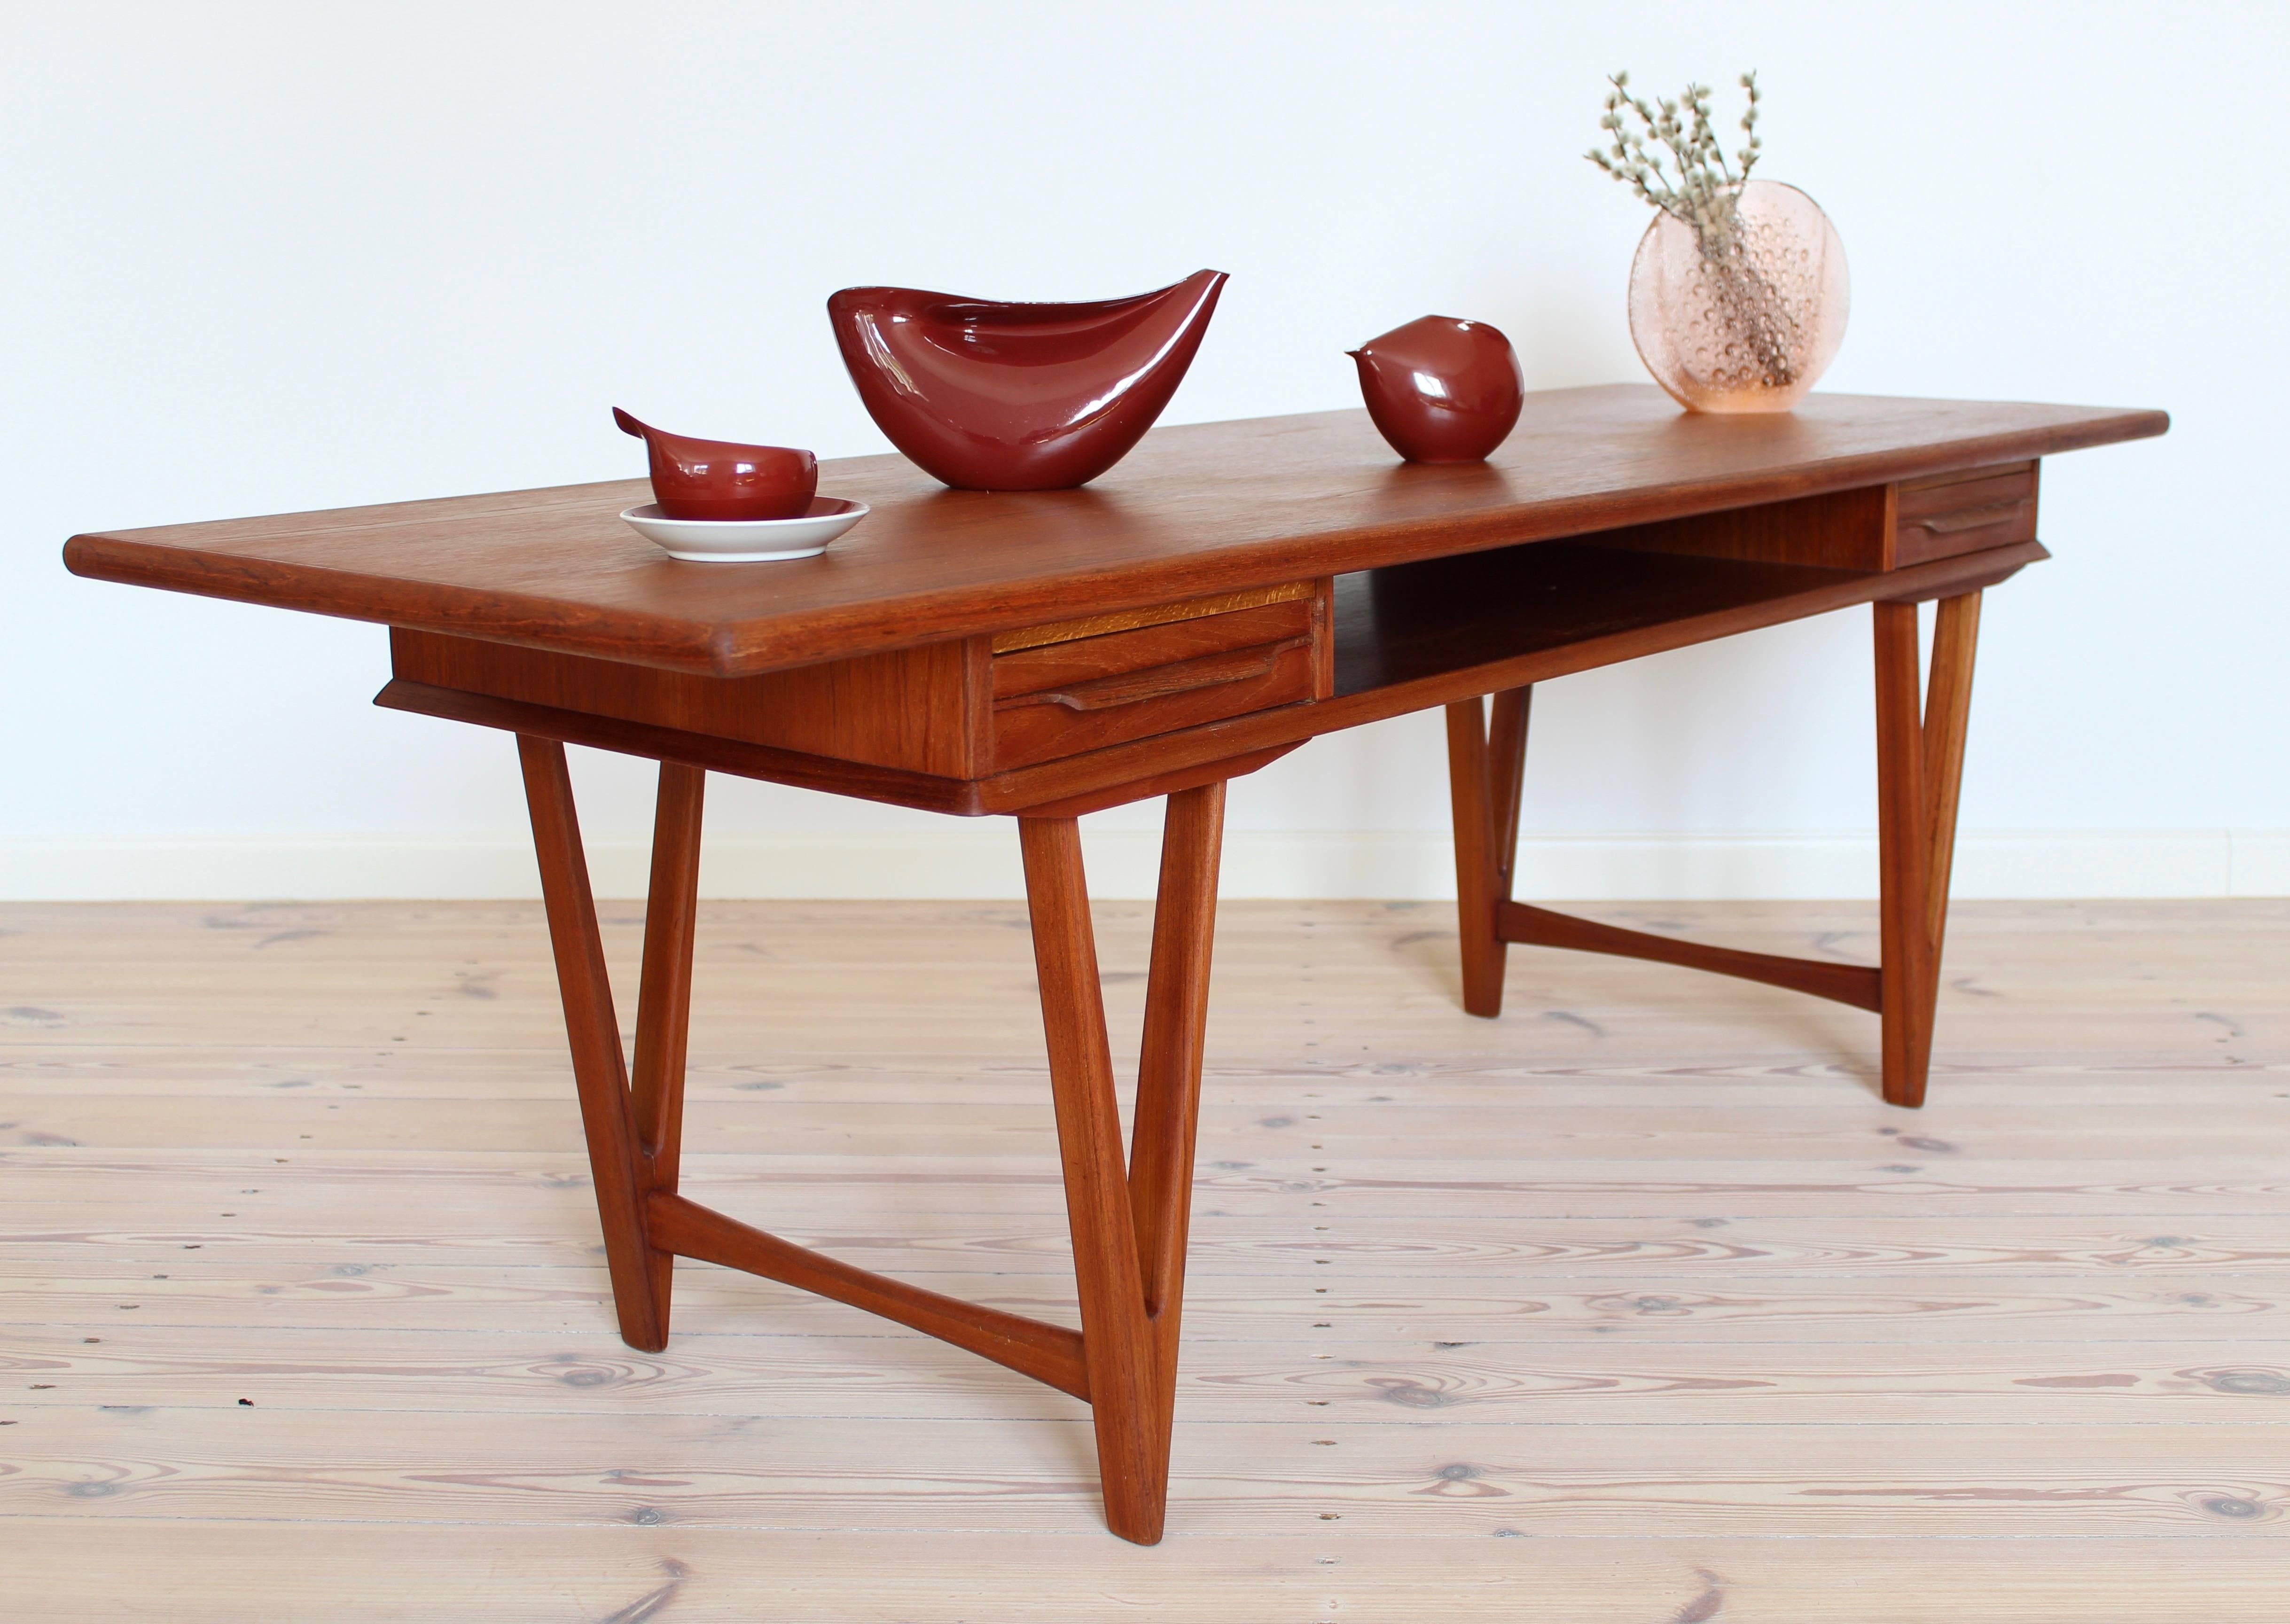 Teak coffee table by E. W. Bach for Toften Møbelfabrik with two drawers and beautifully shaped triangular legs. This piece of furniture was renovated and finished with colorless oil which brings out the warmth and beautiful color of teak wood.
 